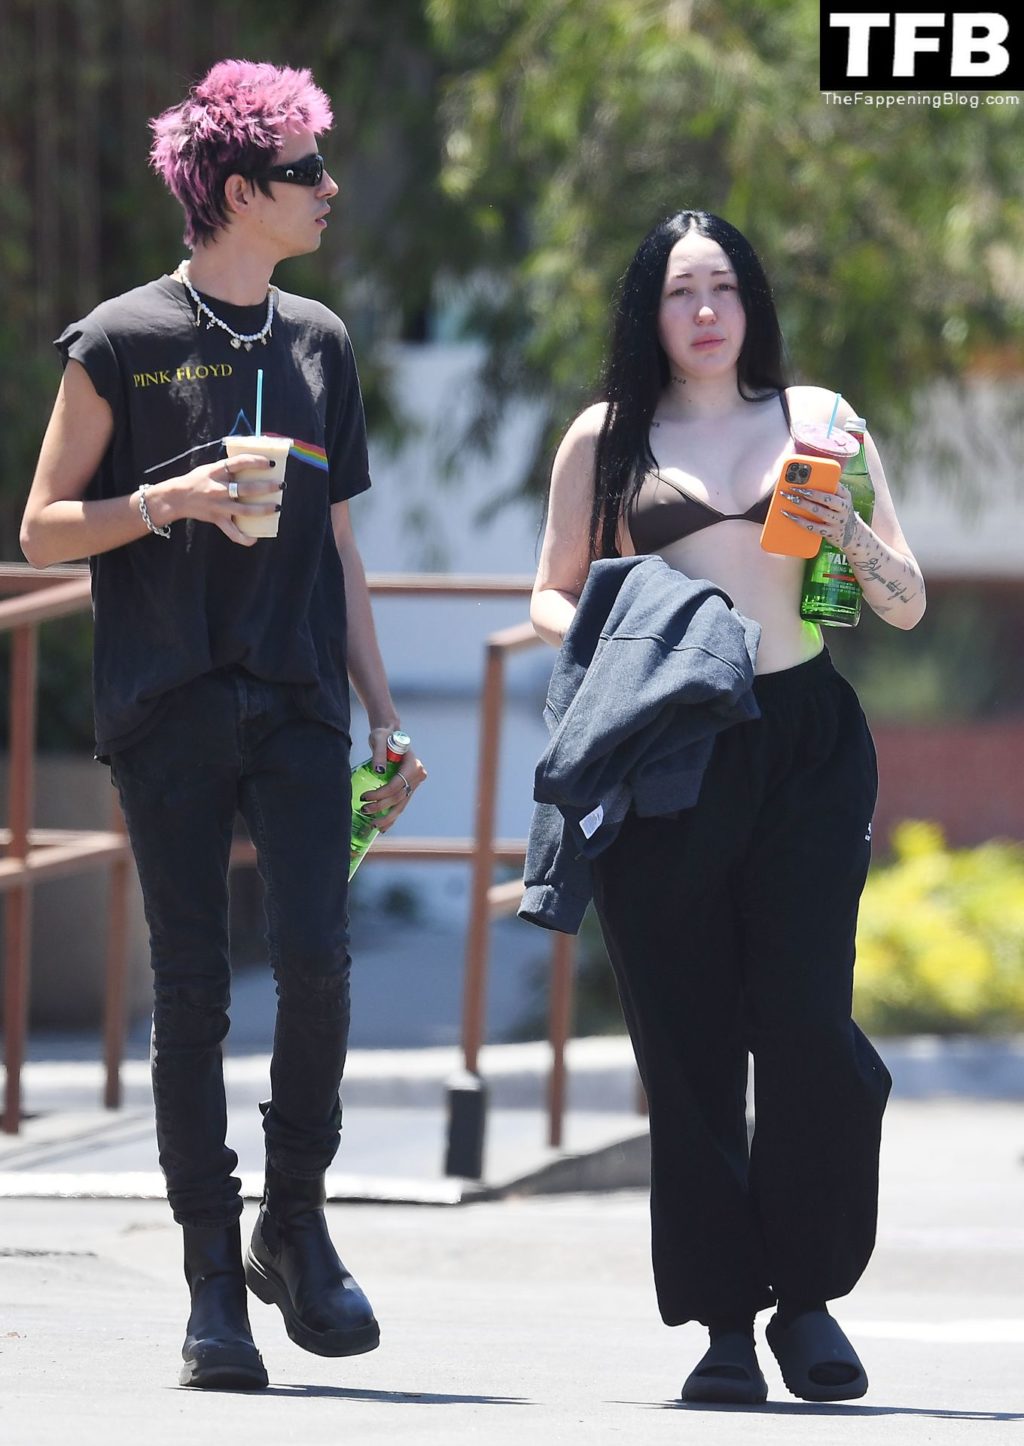 Noah Cyrus Sexy The Fappening Blog 16 1024x1446 - Noah Cyrus Slips Into a Bikini Top Cooling Off From the Sweltering Heat with Her Boyfriend in LA (17 Photos)